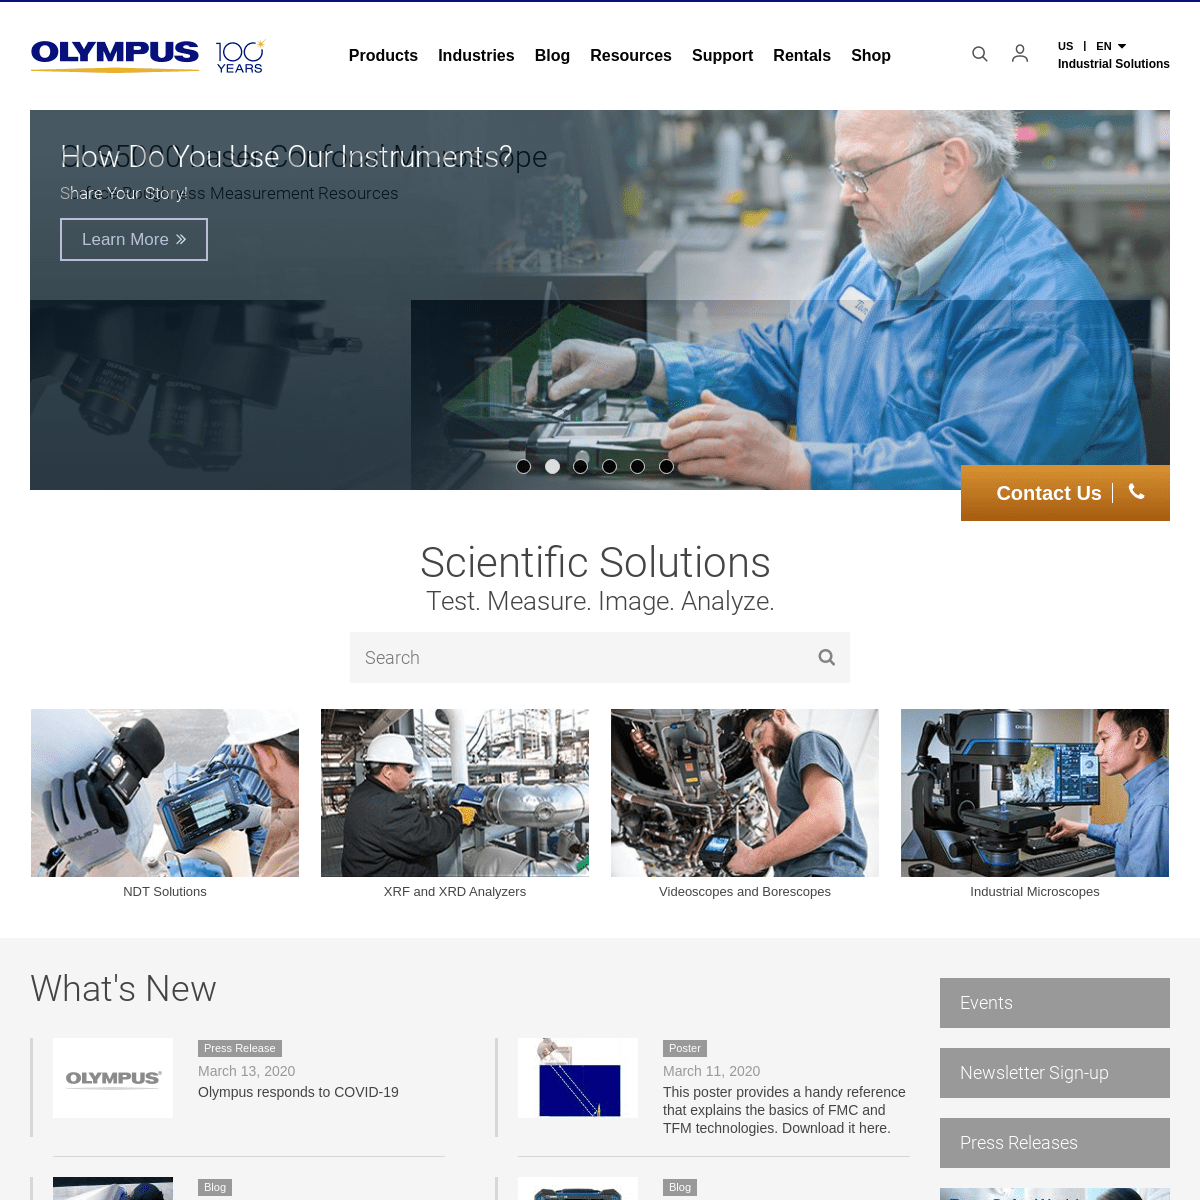 A complete backup of olympus-ims.com